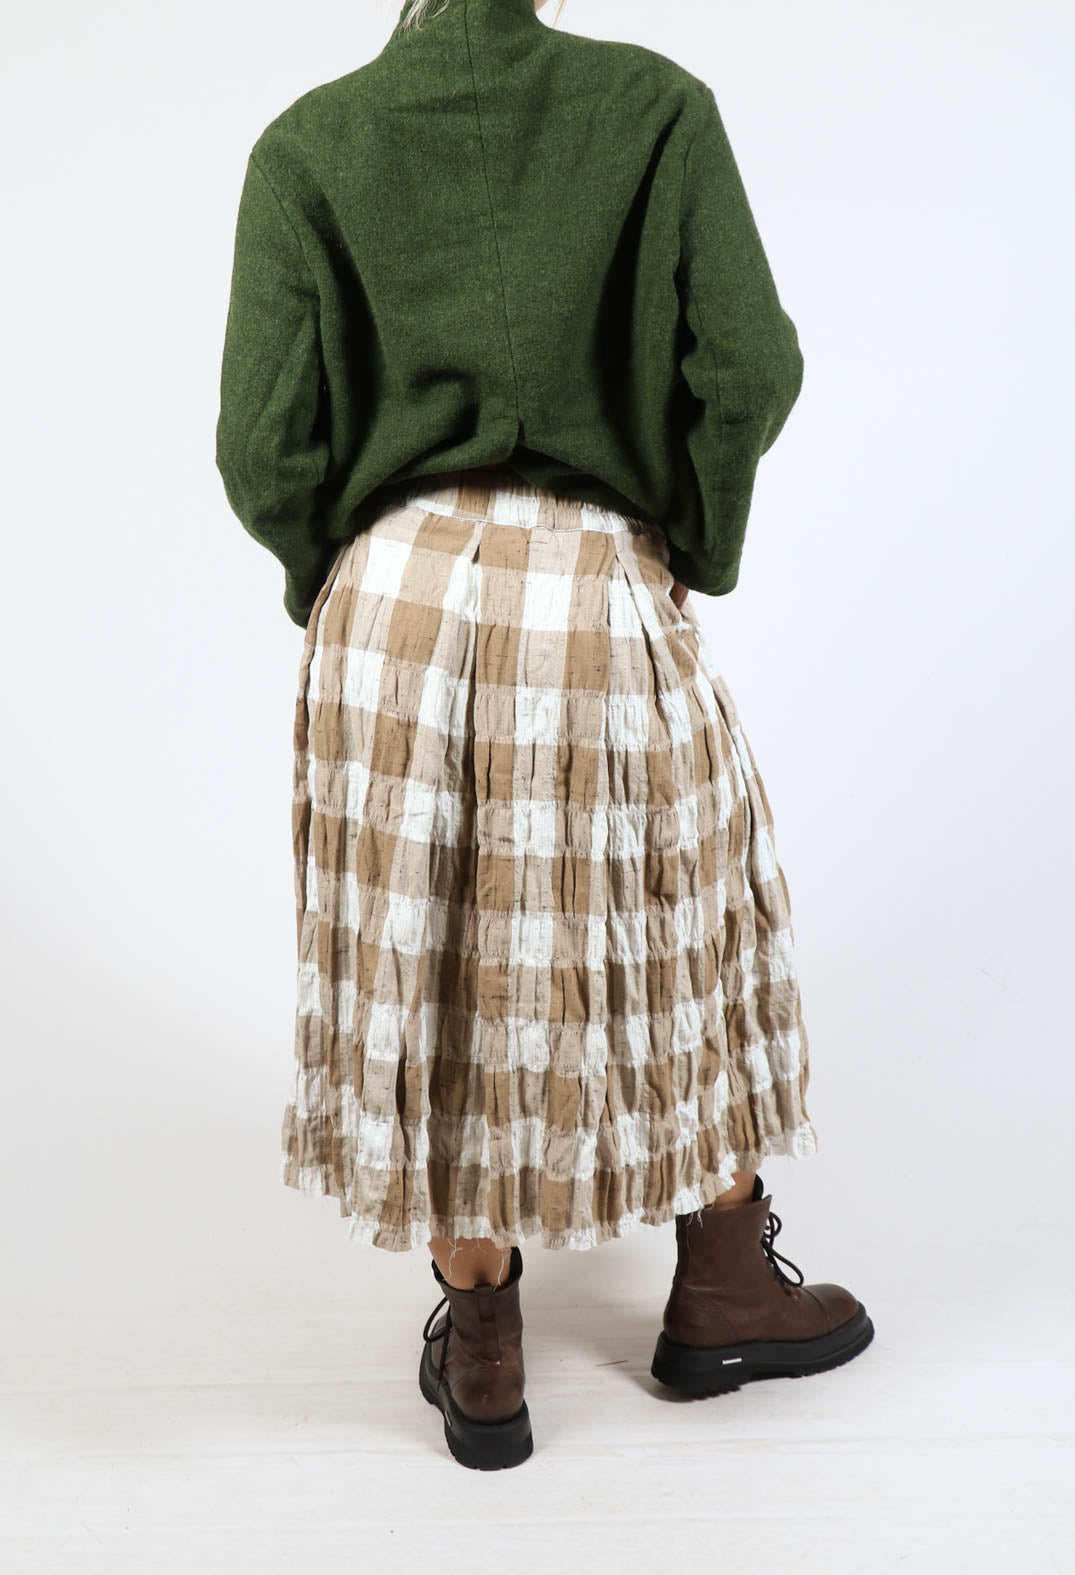 Justin Skirt in Brown Check